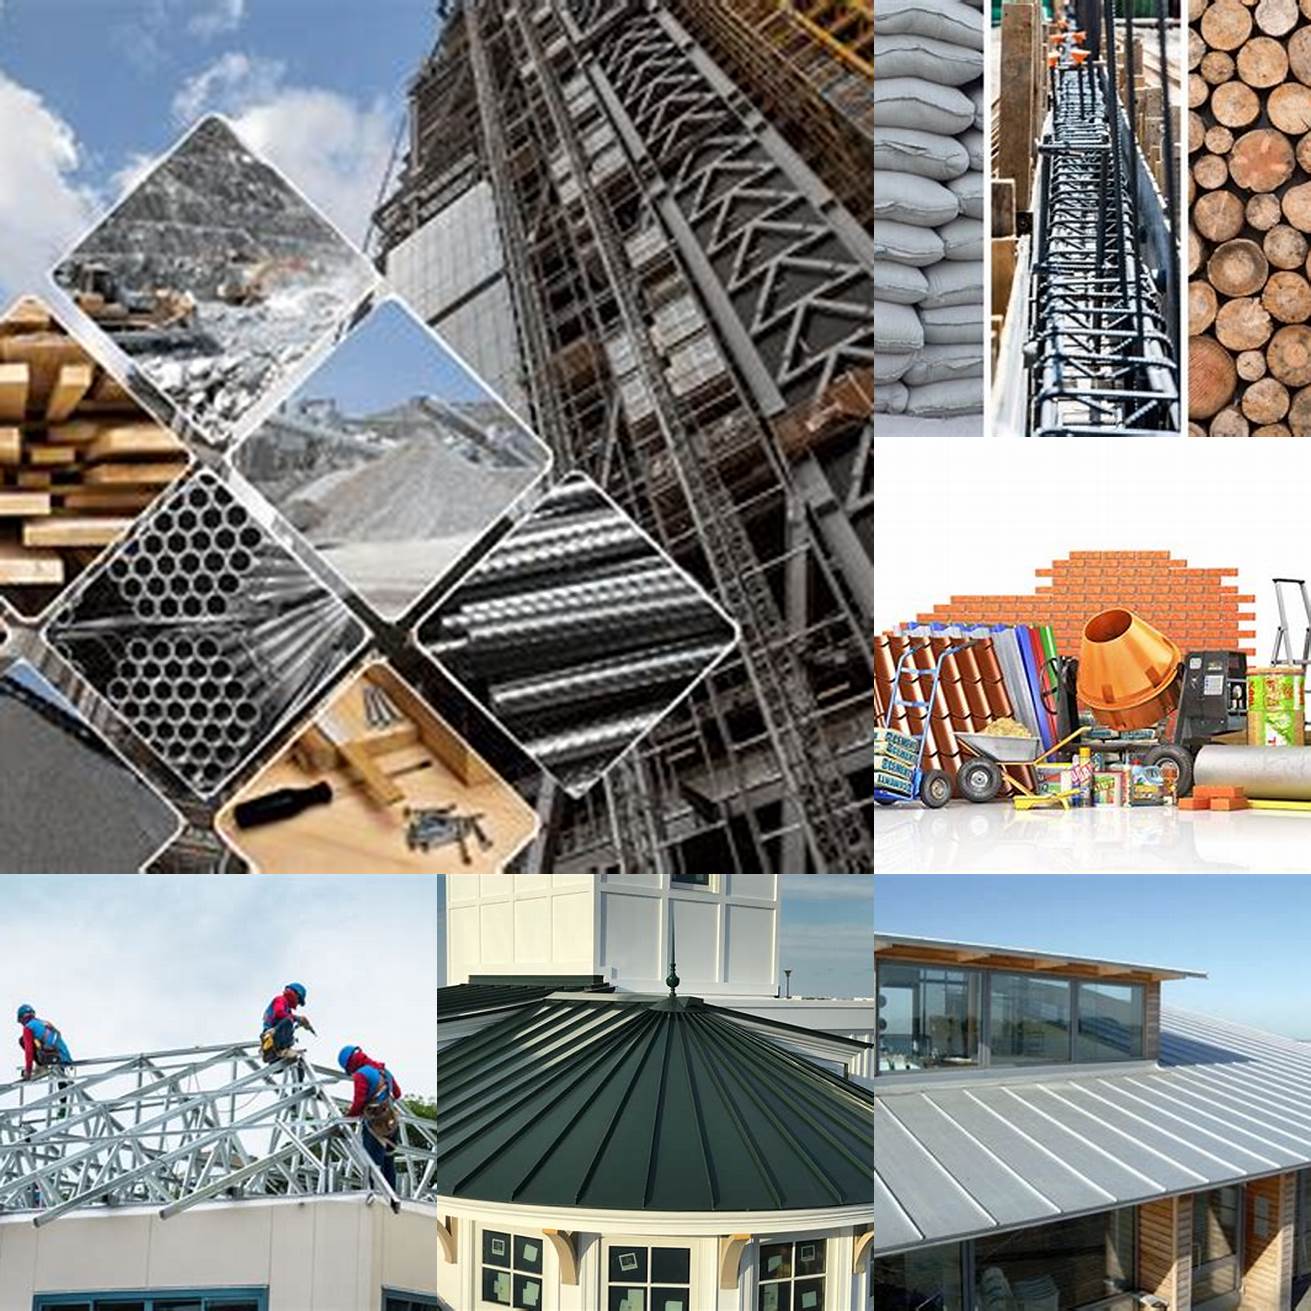 Invest in high-quality materials and construction for durability and longevity